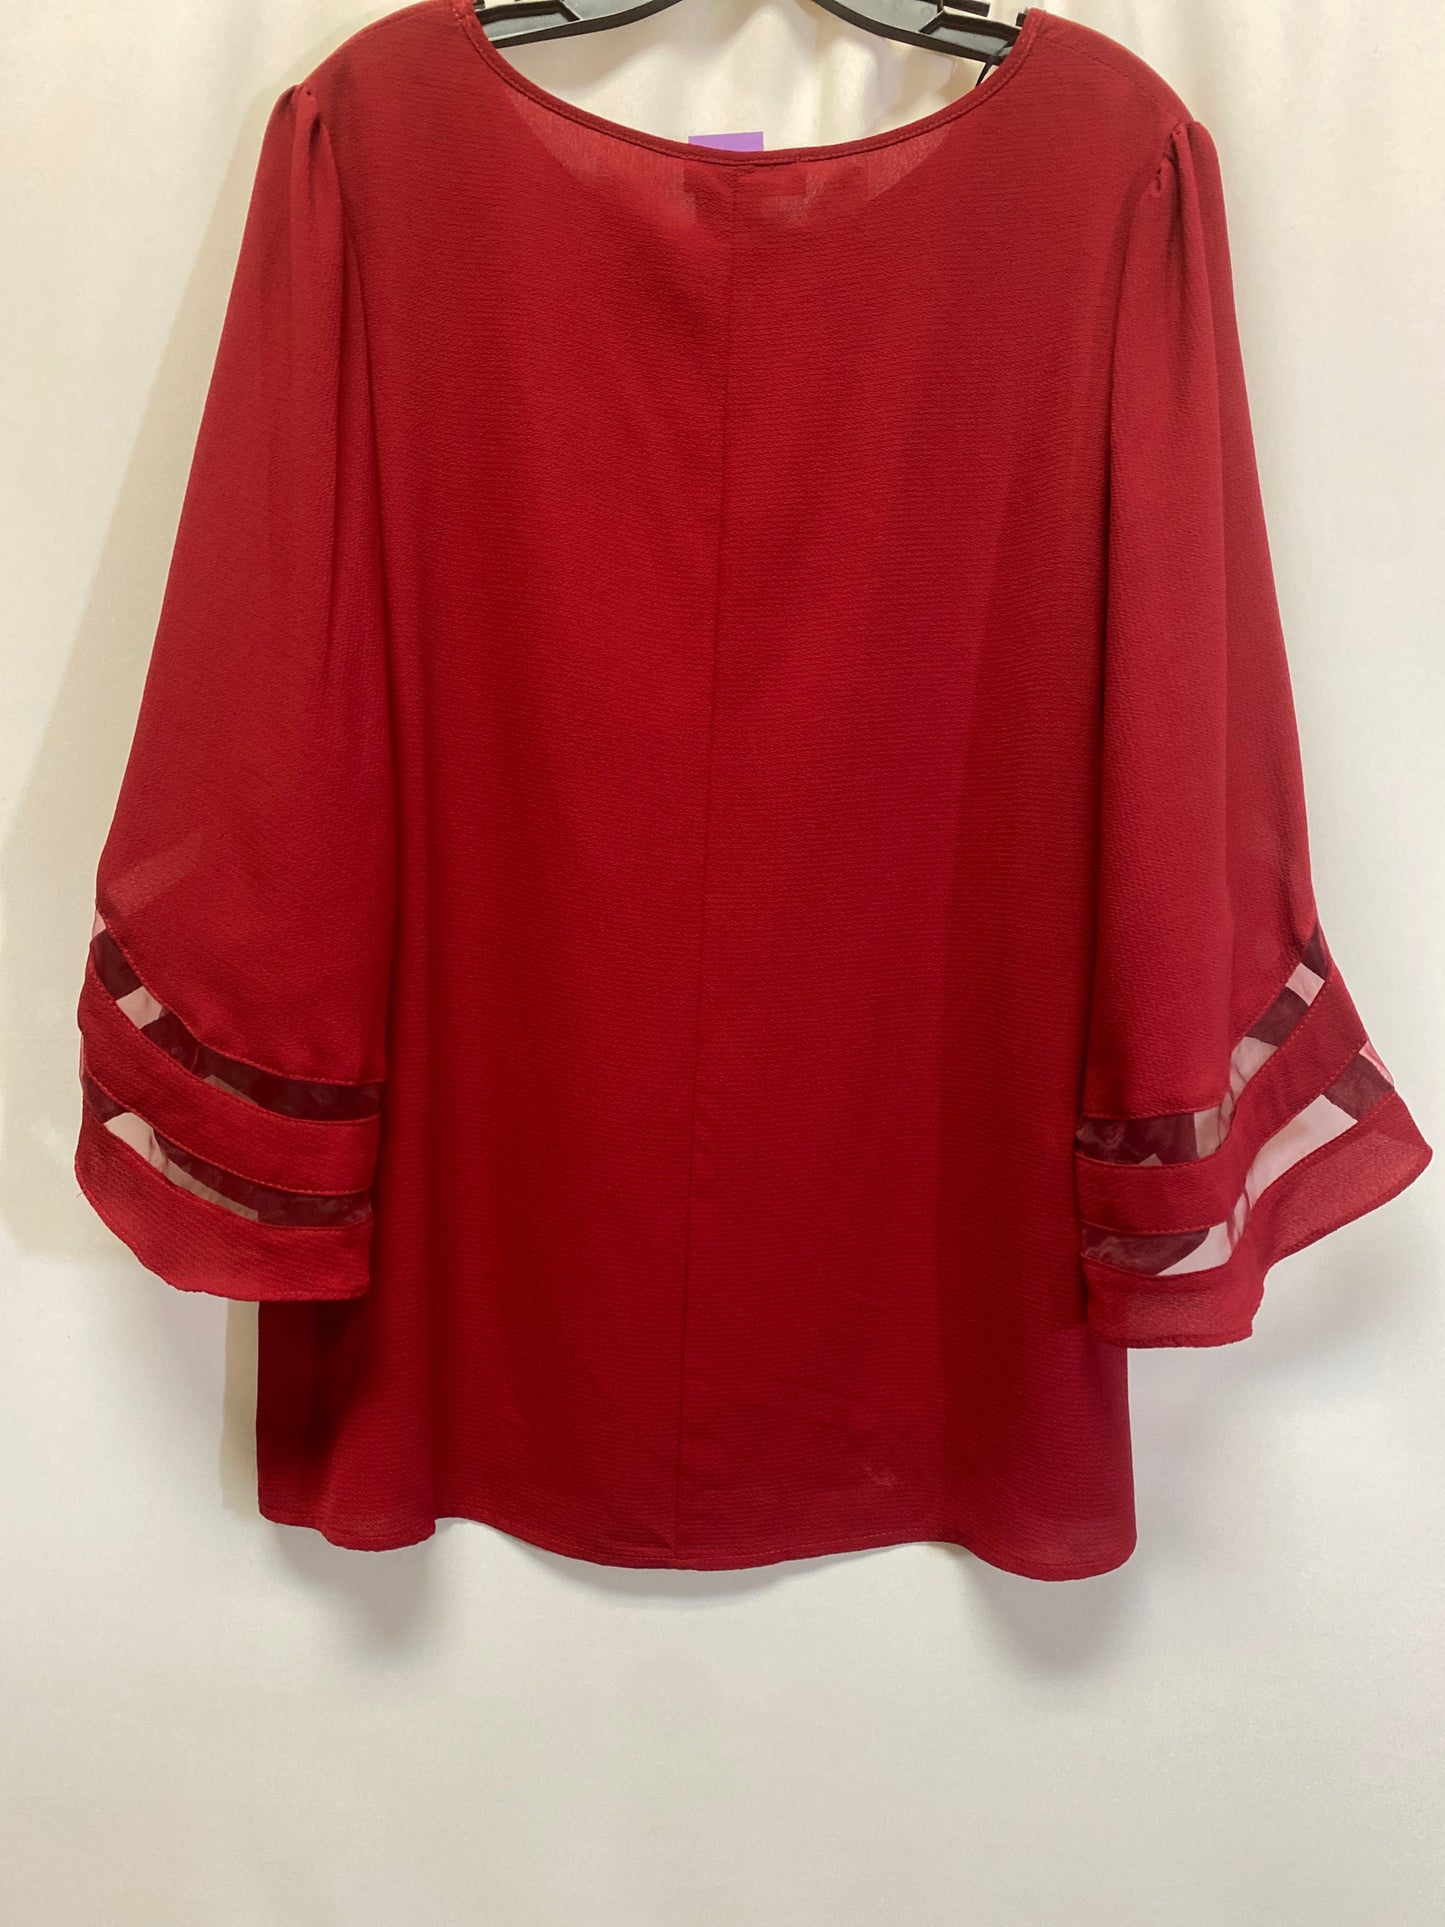 Red Top 3/4 Sleeve Umgee, Size 1x